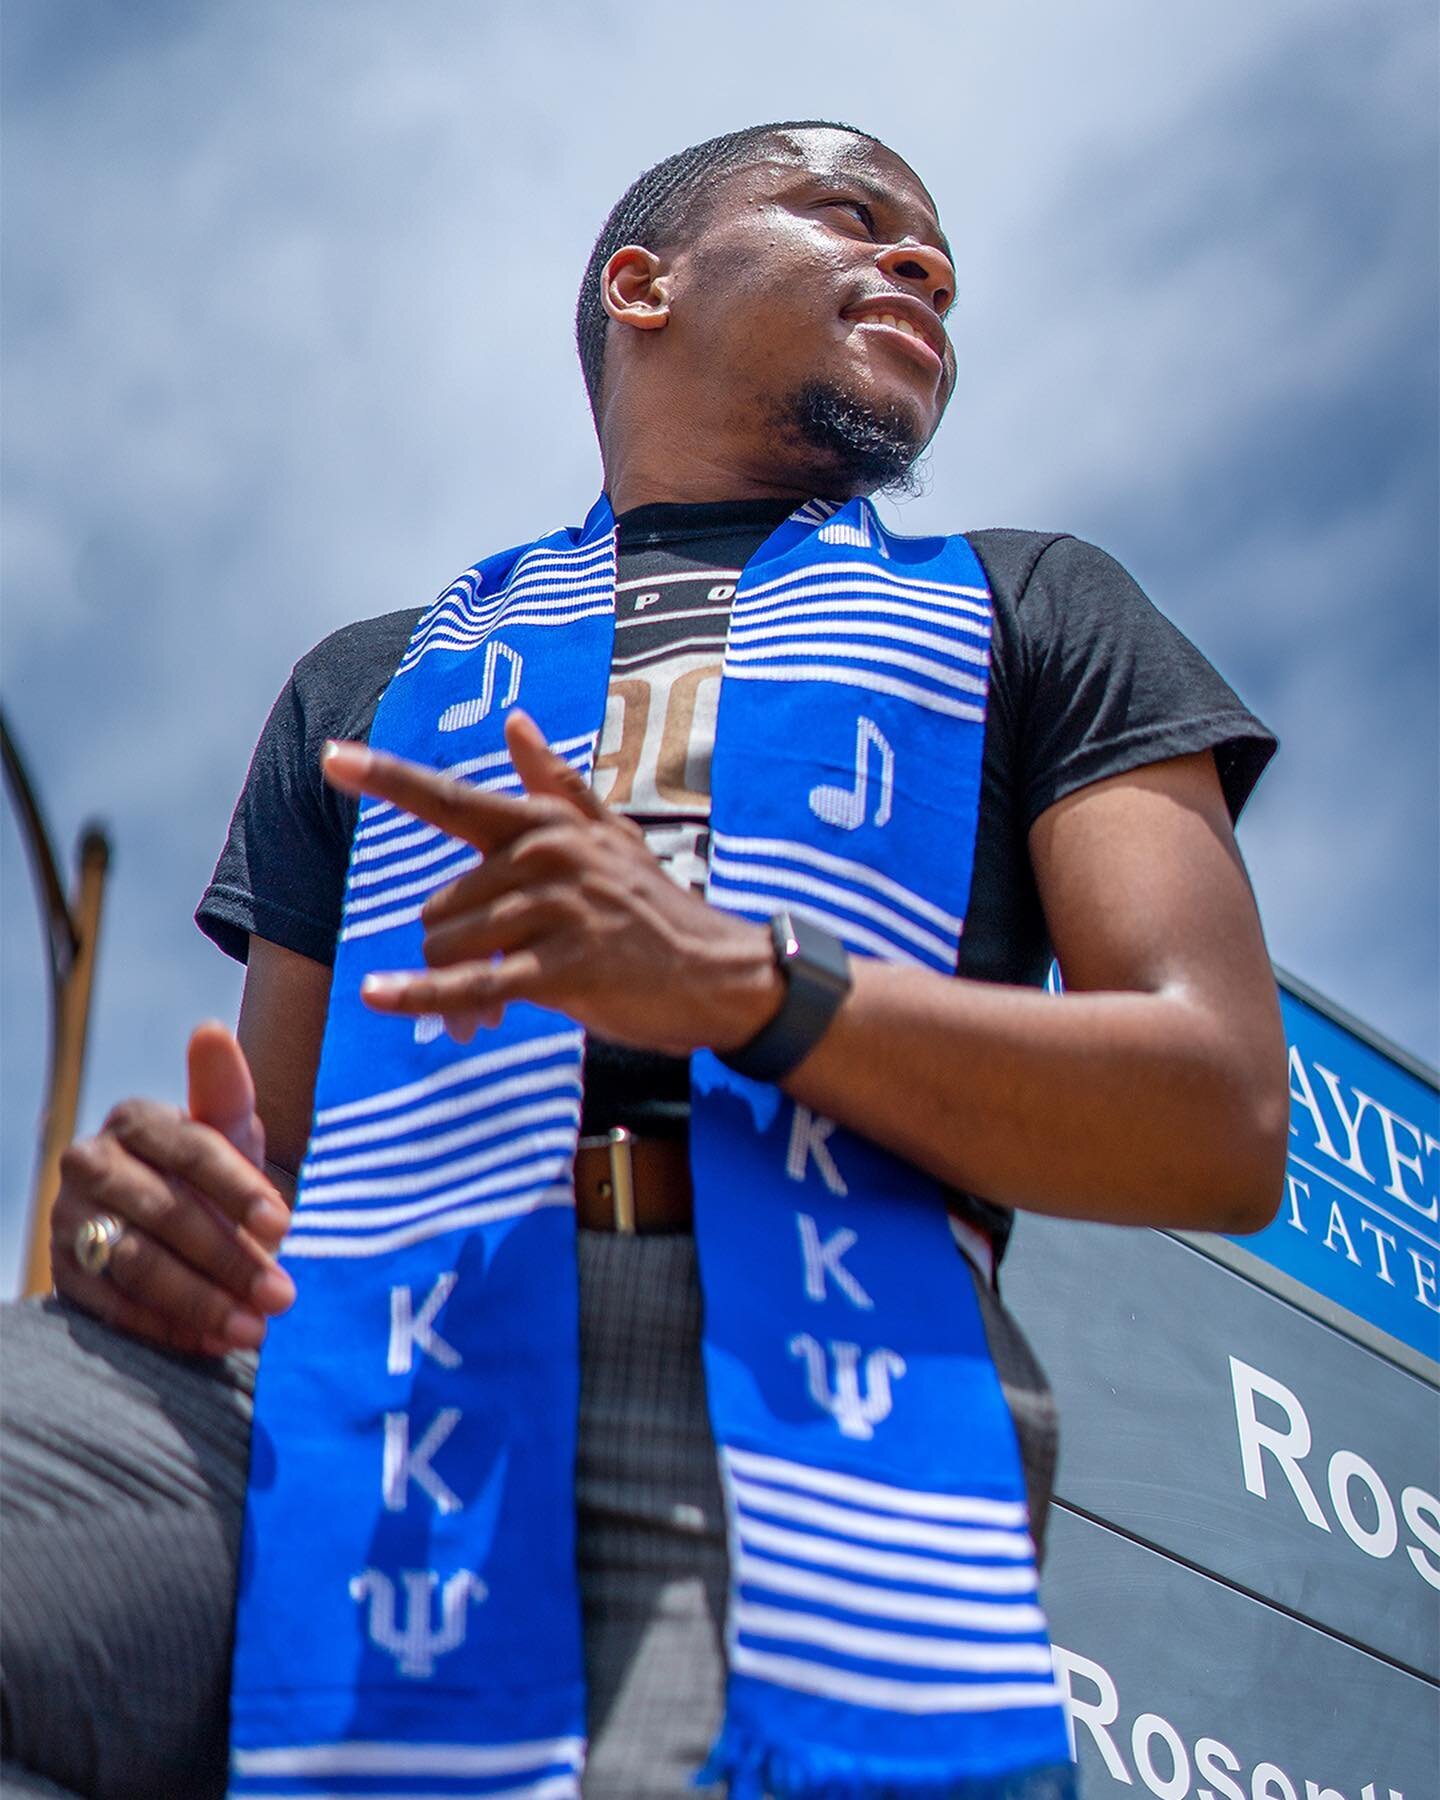 Doing what I was made to do&hellip;&rdquo;Strive for the Highest.&rdquo;
👨🏾&zwj;🎓: @professorflipp 
📸: Sony A7II
#faystate21 #faystate #broncopride #fayettevillenc #kkpsi #aea #hbcugrad #collegegrad #classof2021 #sony #sonyalpha